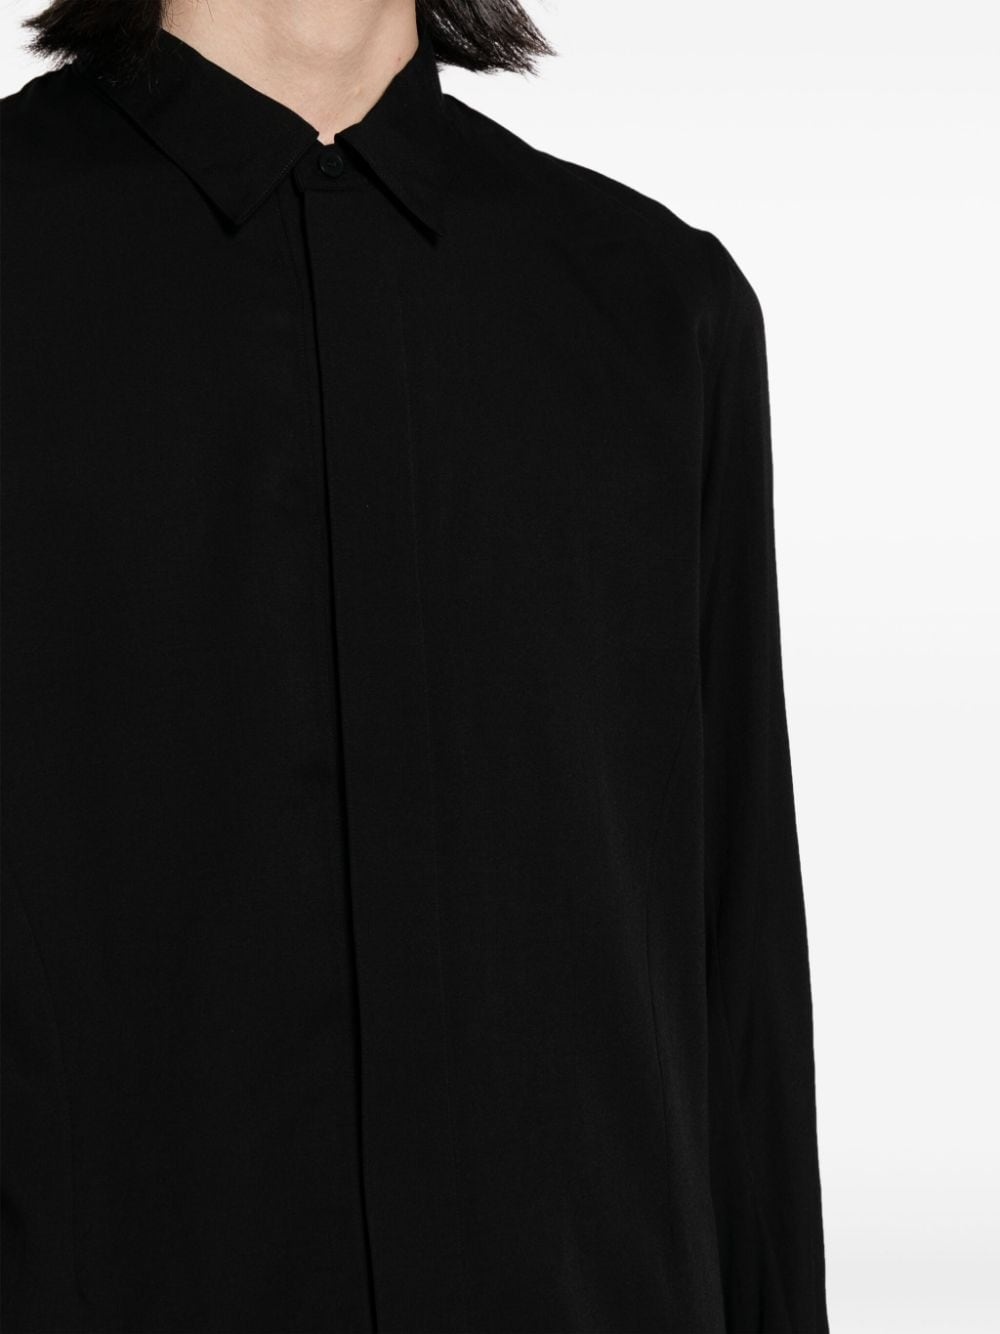 classic-collar concealed-fastening shirt - 5